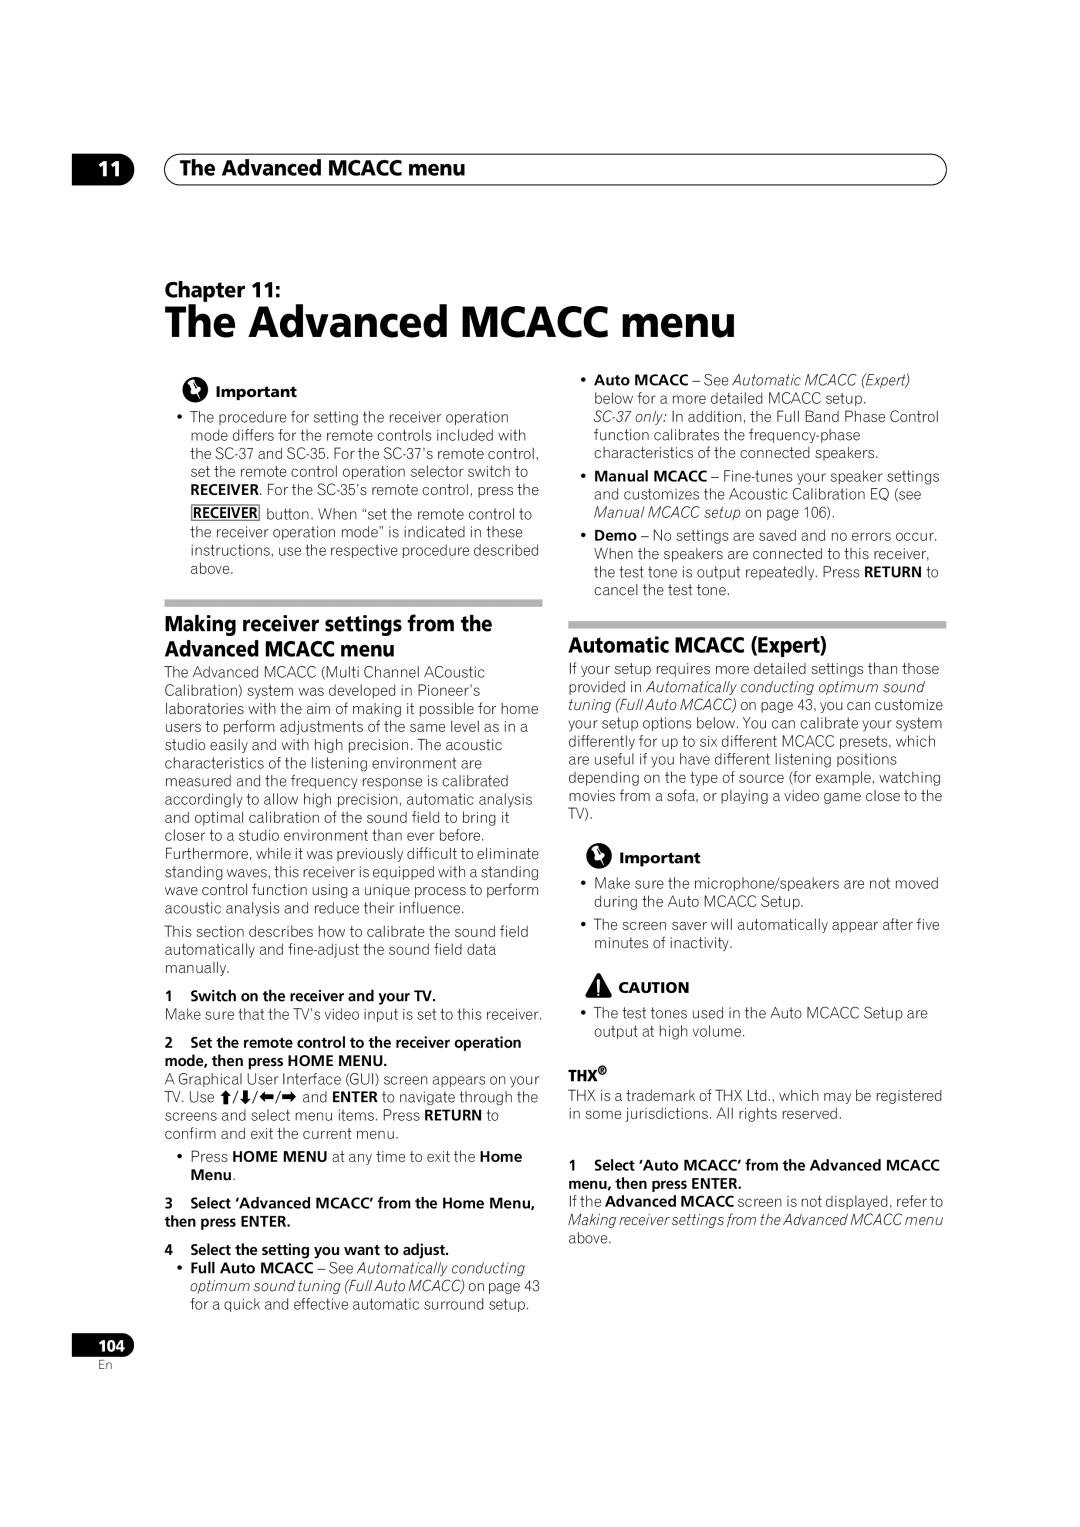 Pioneer SC-35 manual 11The Advanced MCACC menu Chapter, Automatic MCACC Expert 